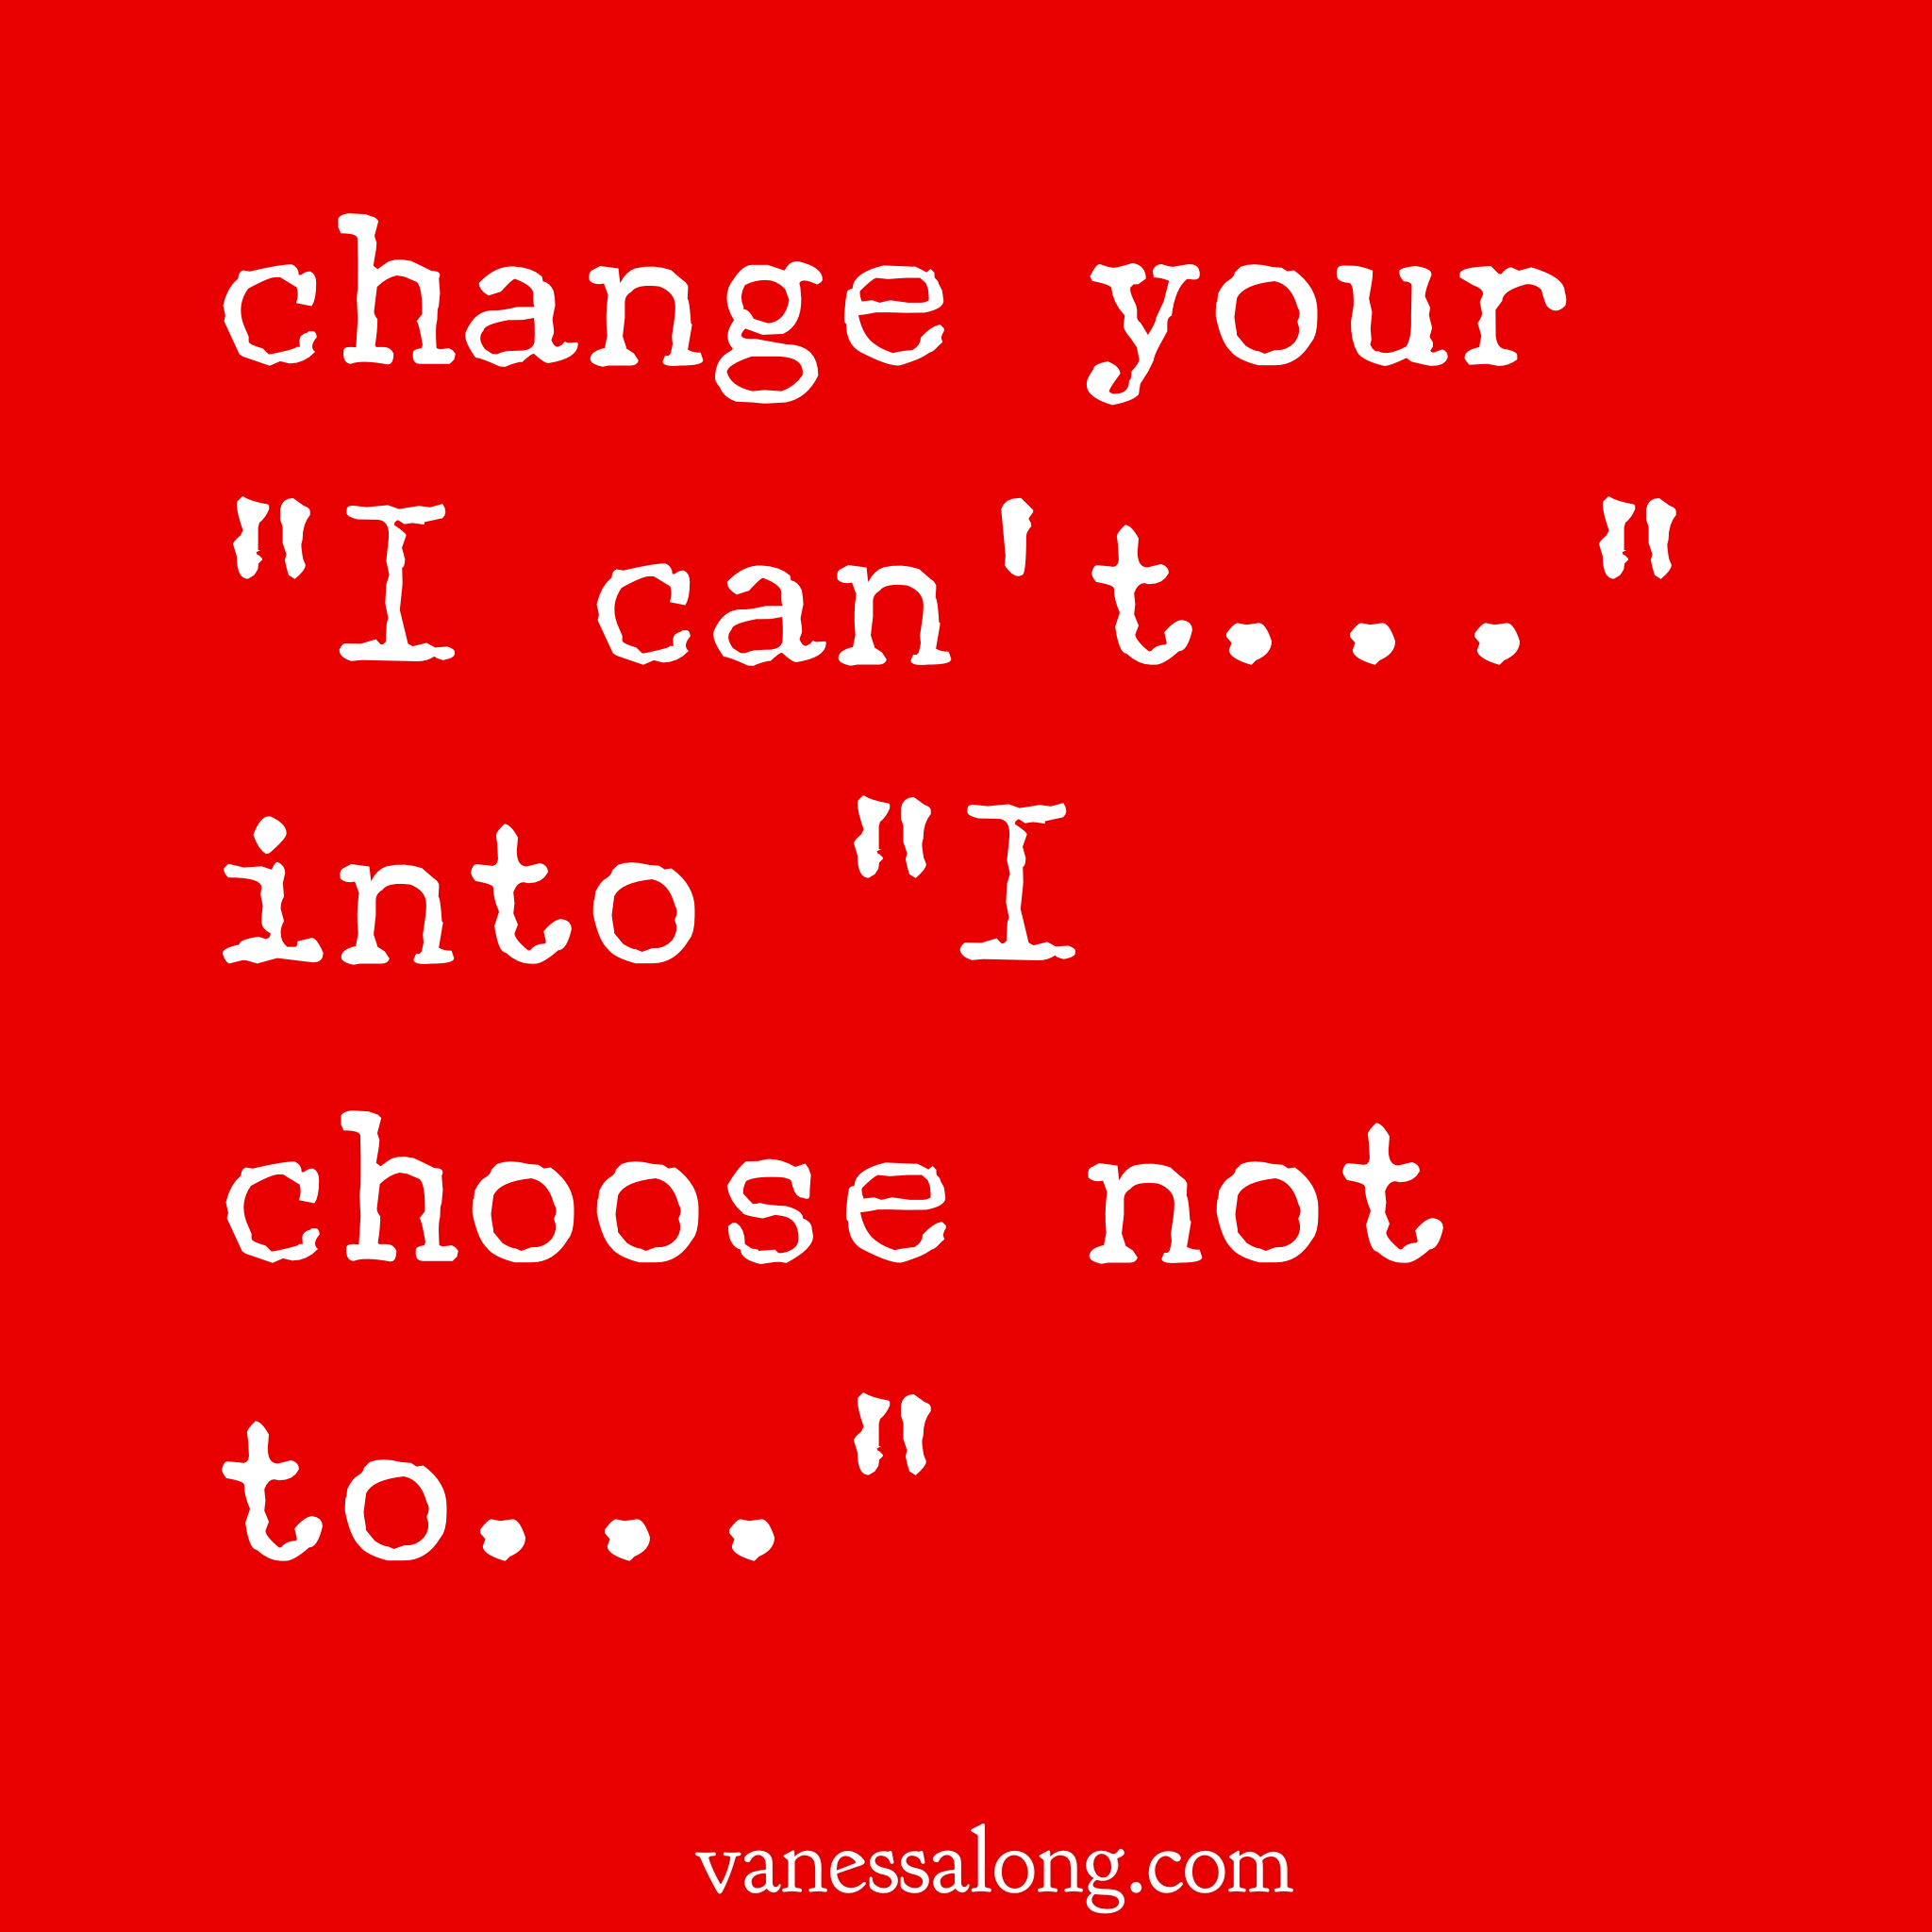 change "I can't" into "I choose not to"